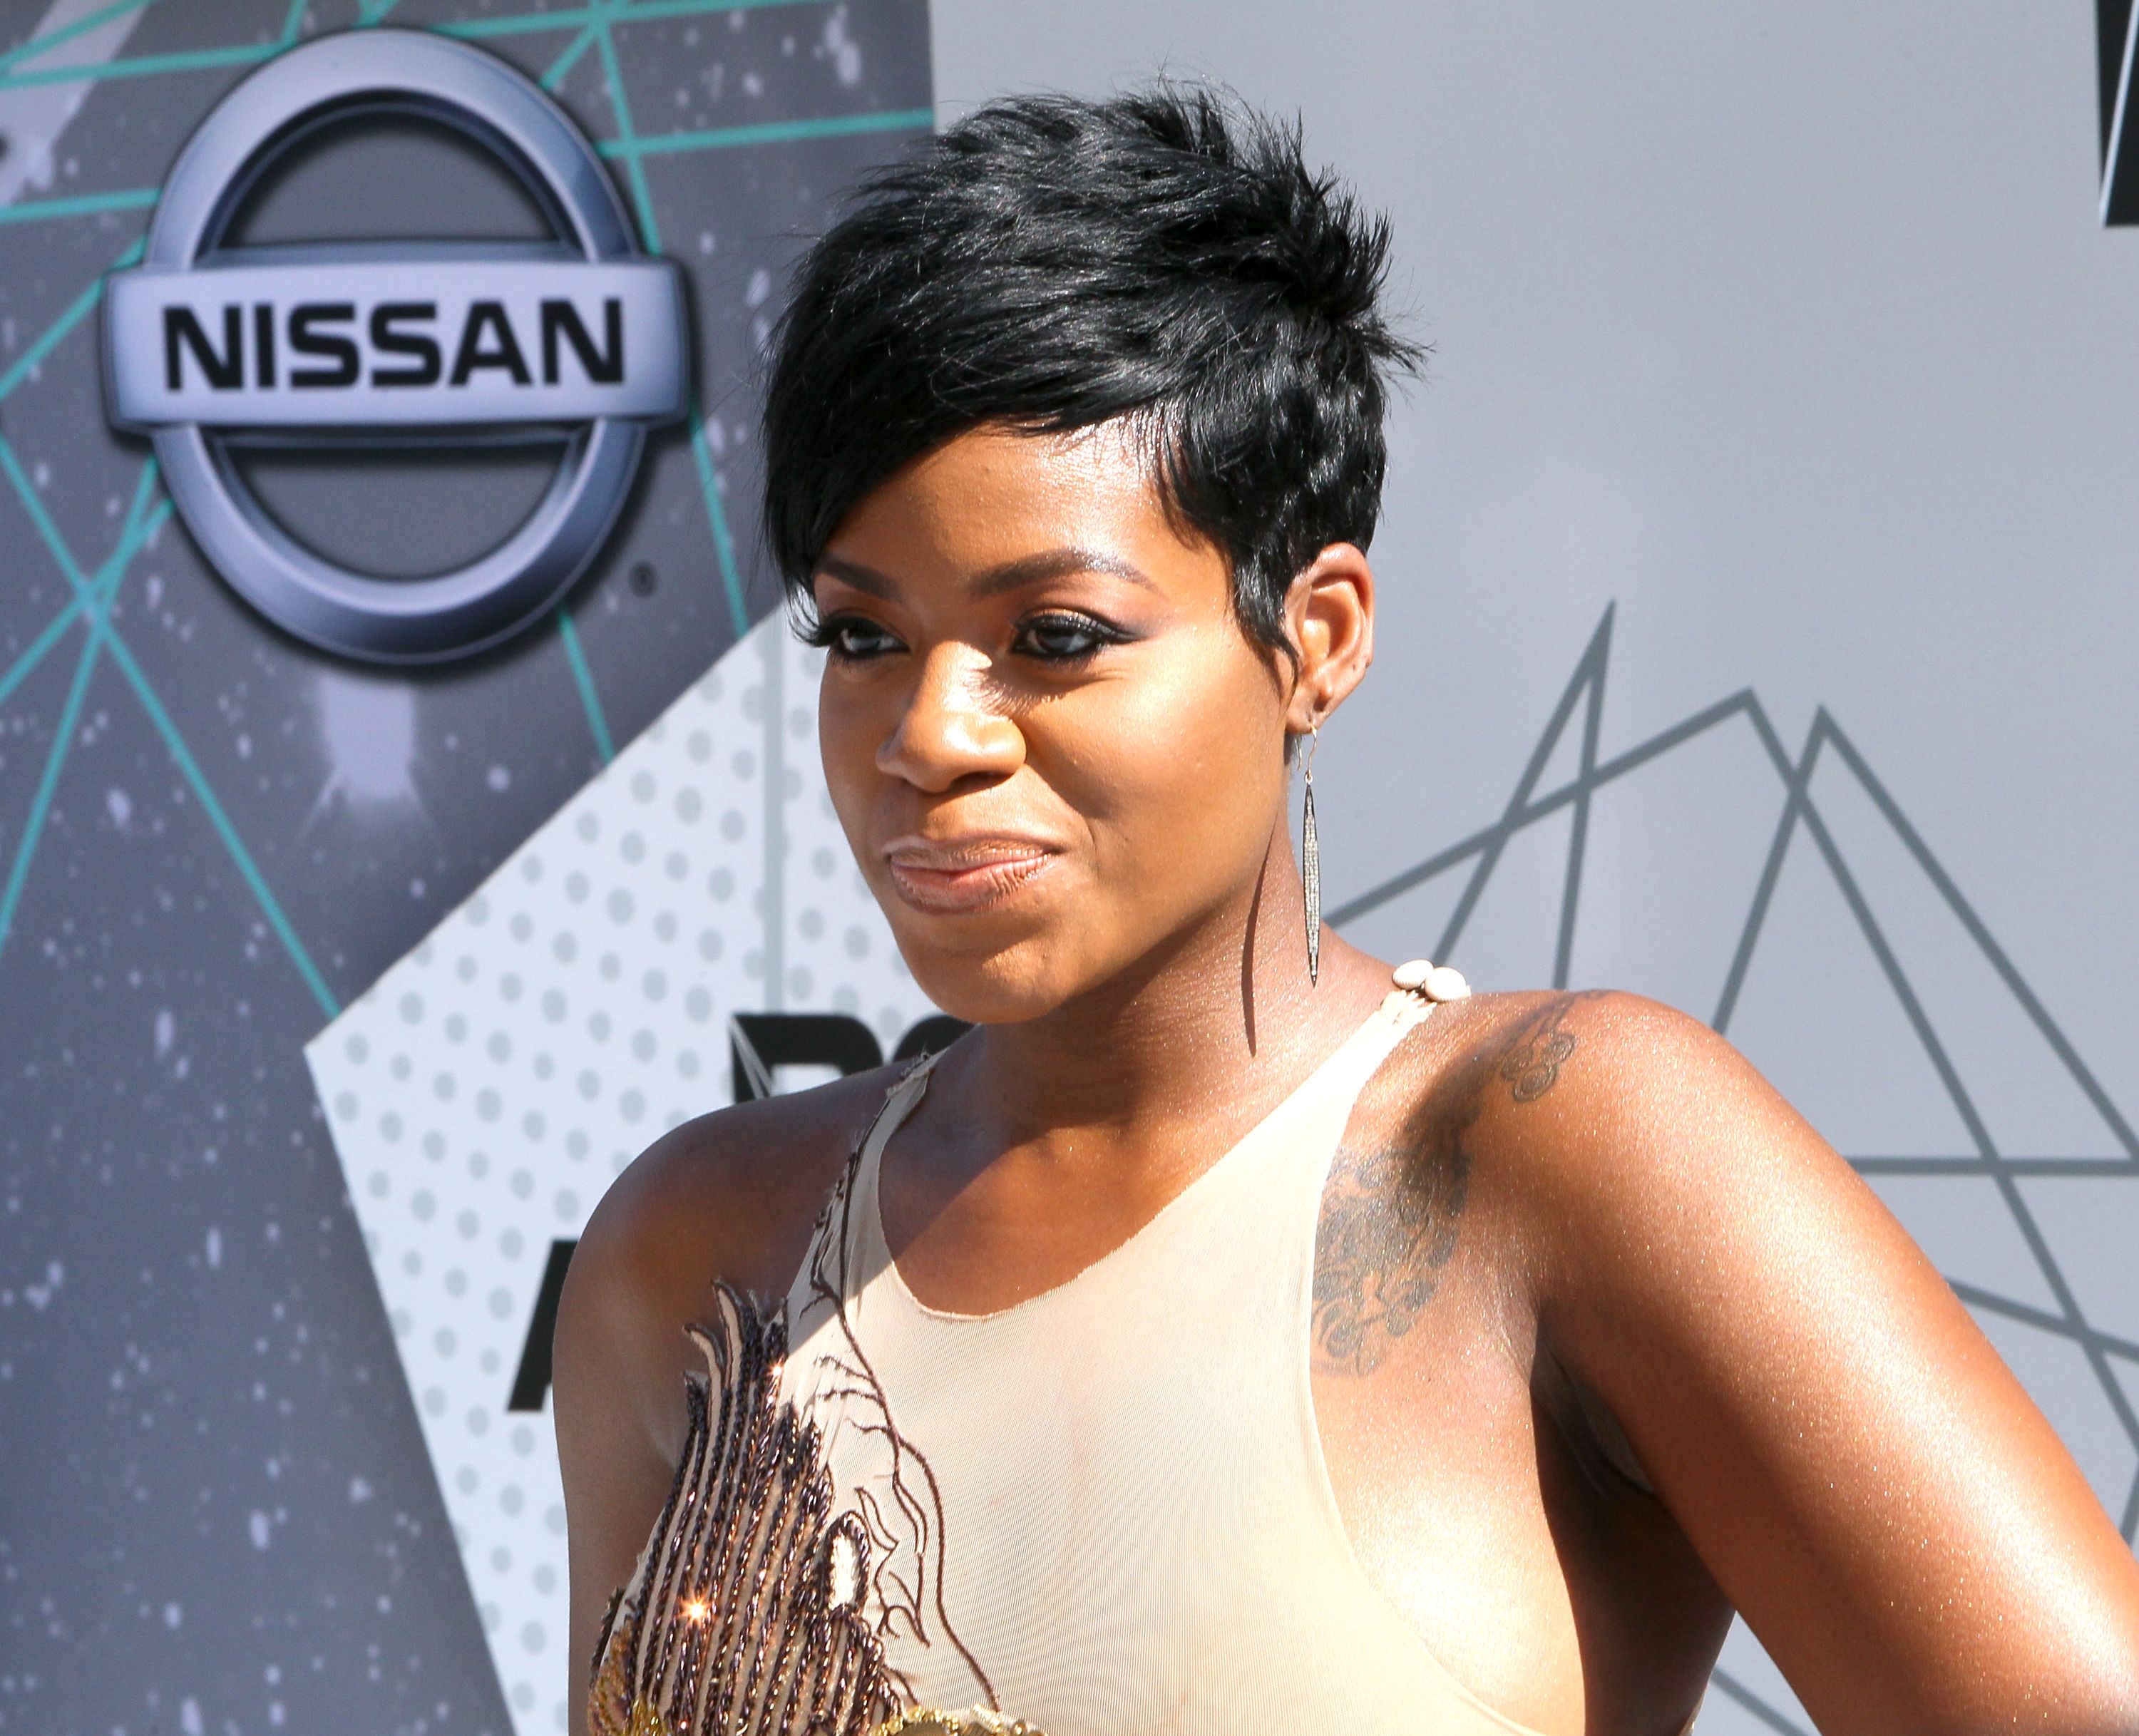 Fantasia Barrino at the BET Awards on June 26, 2016 in Los Angeles. │Photo: Getty Images